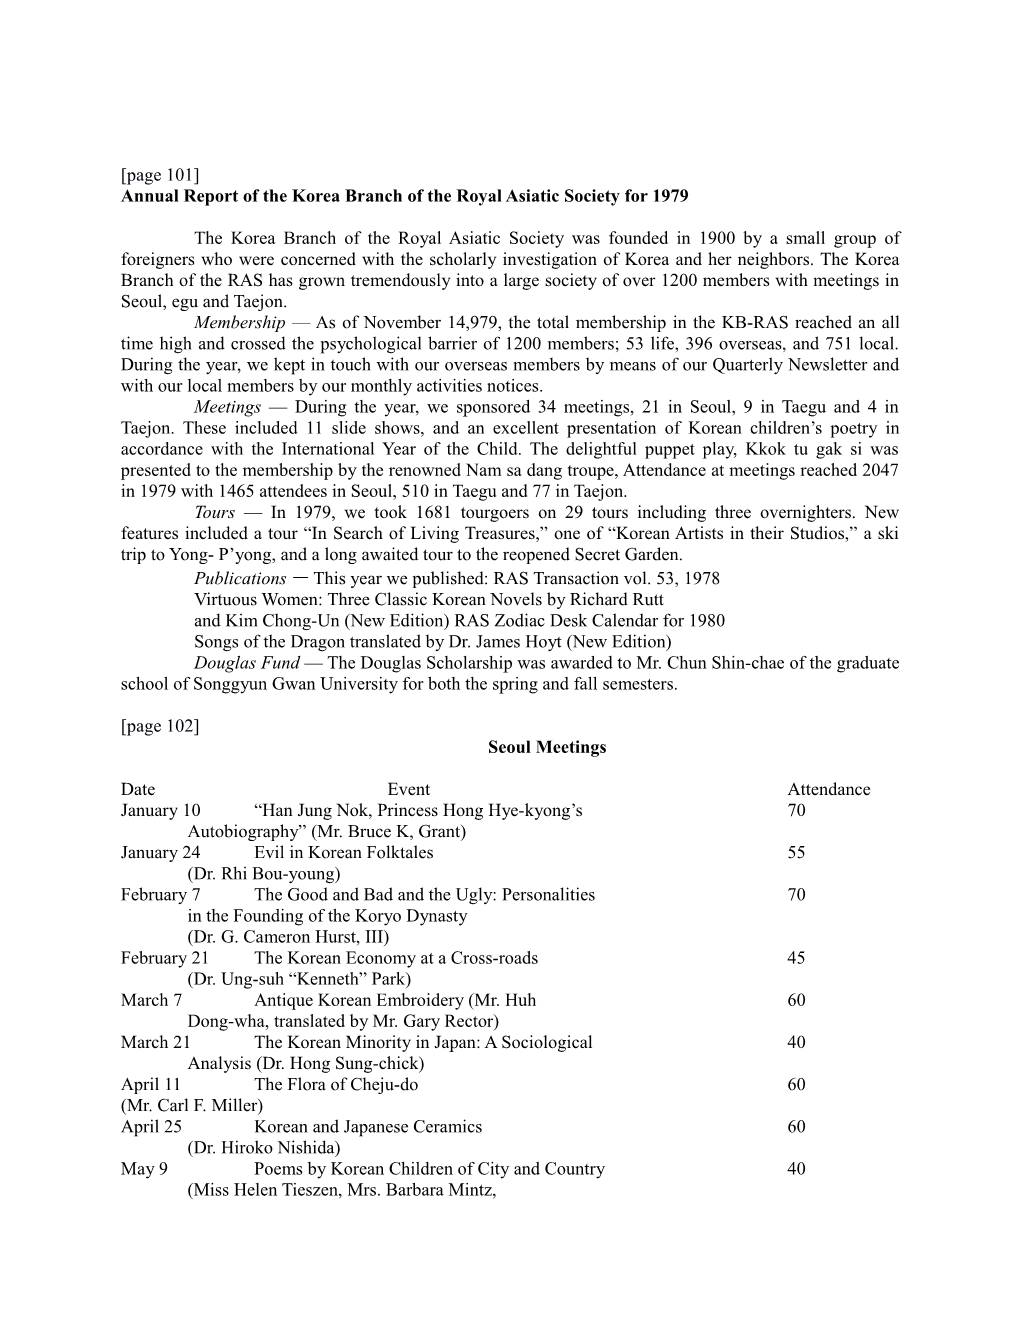 Annual Report of the Korea Branch of the Royal Asiatic Society for 1979